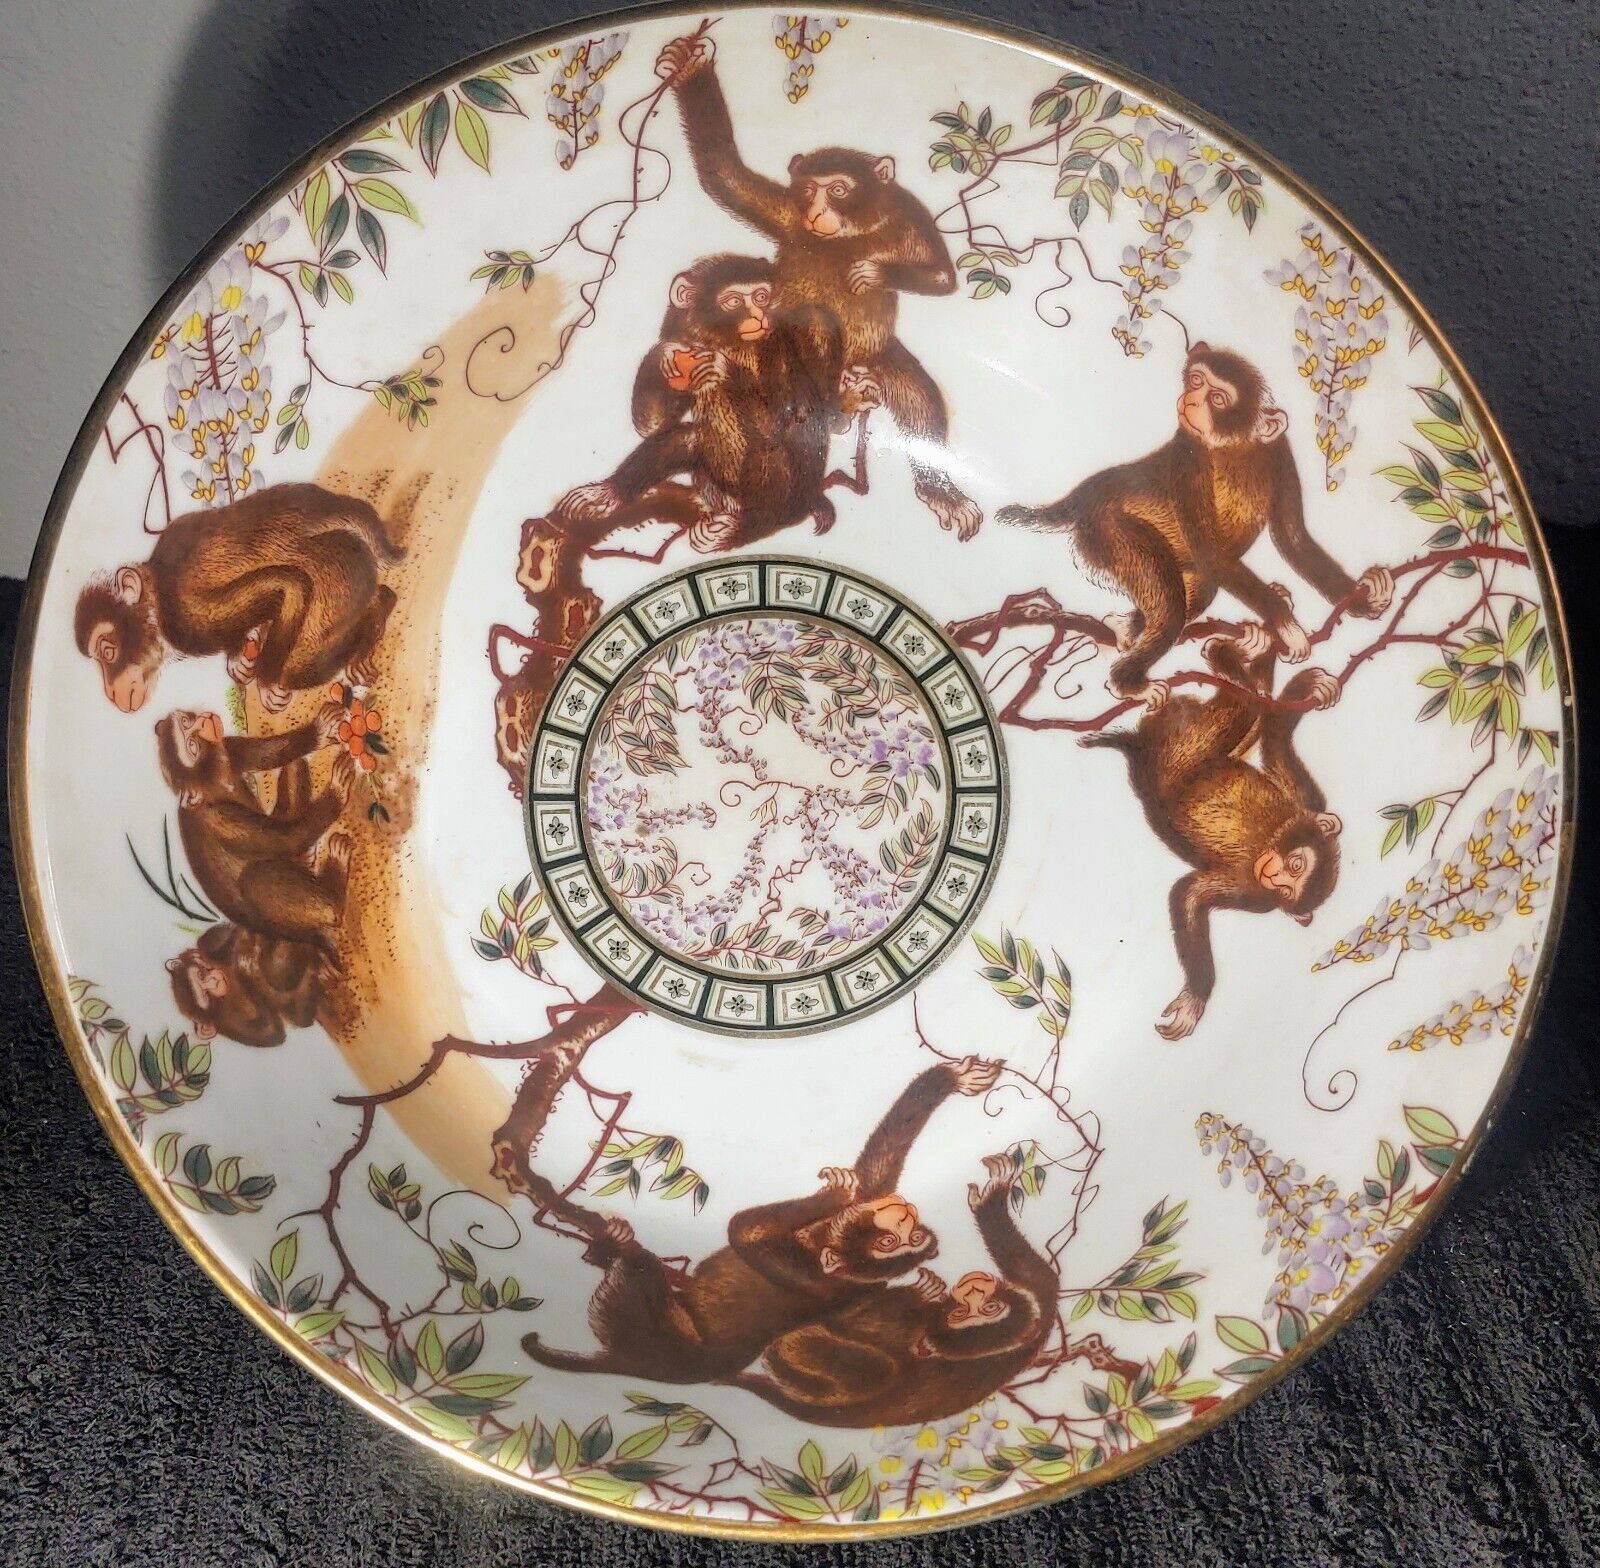 1980s Chinoiserie Porcelain Decorative Bowl With Monkeys,Trees,and Florals